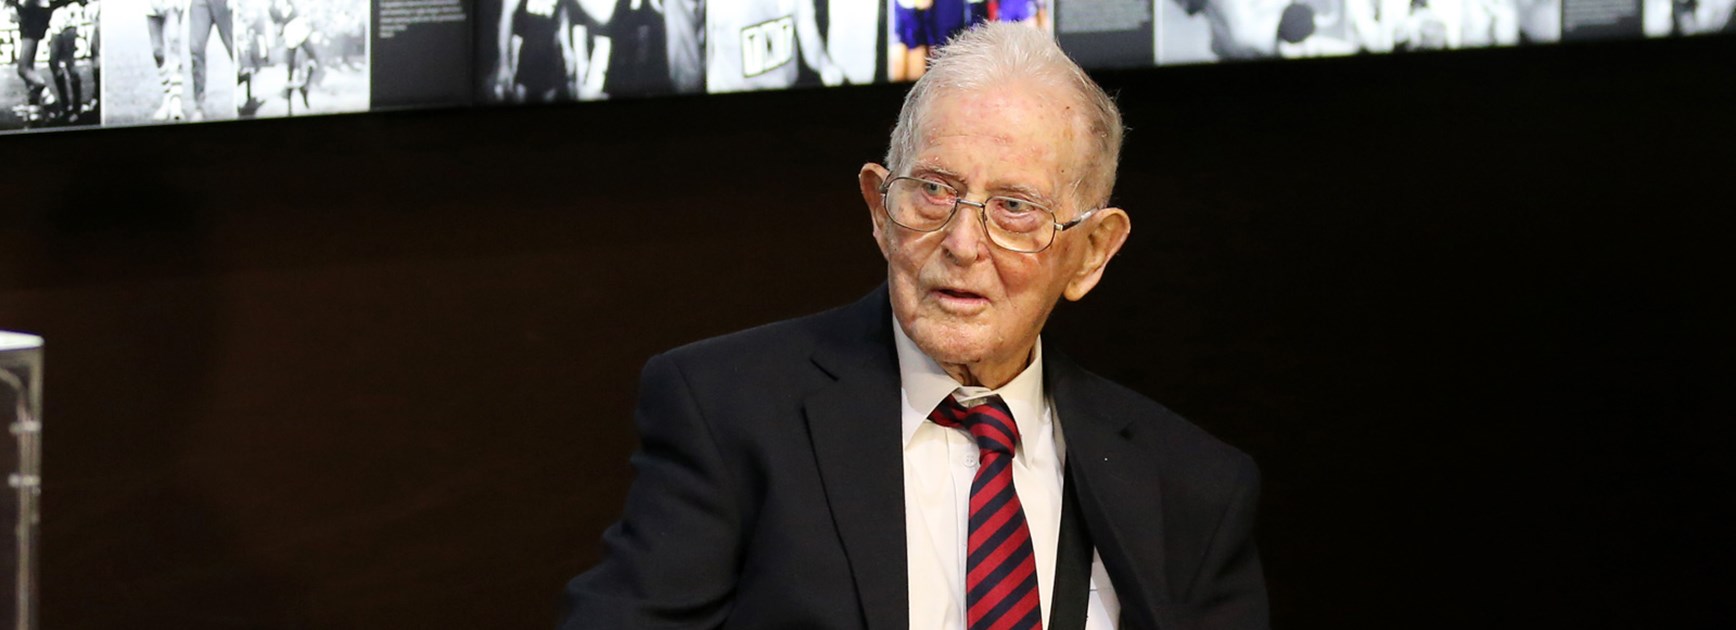 The NRL celebrated the 100th birthday of former referee Robert Culkin.